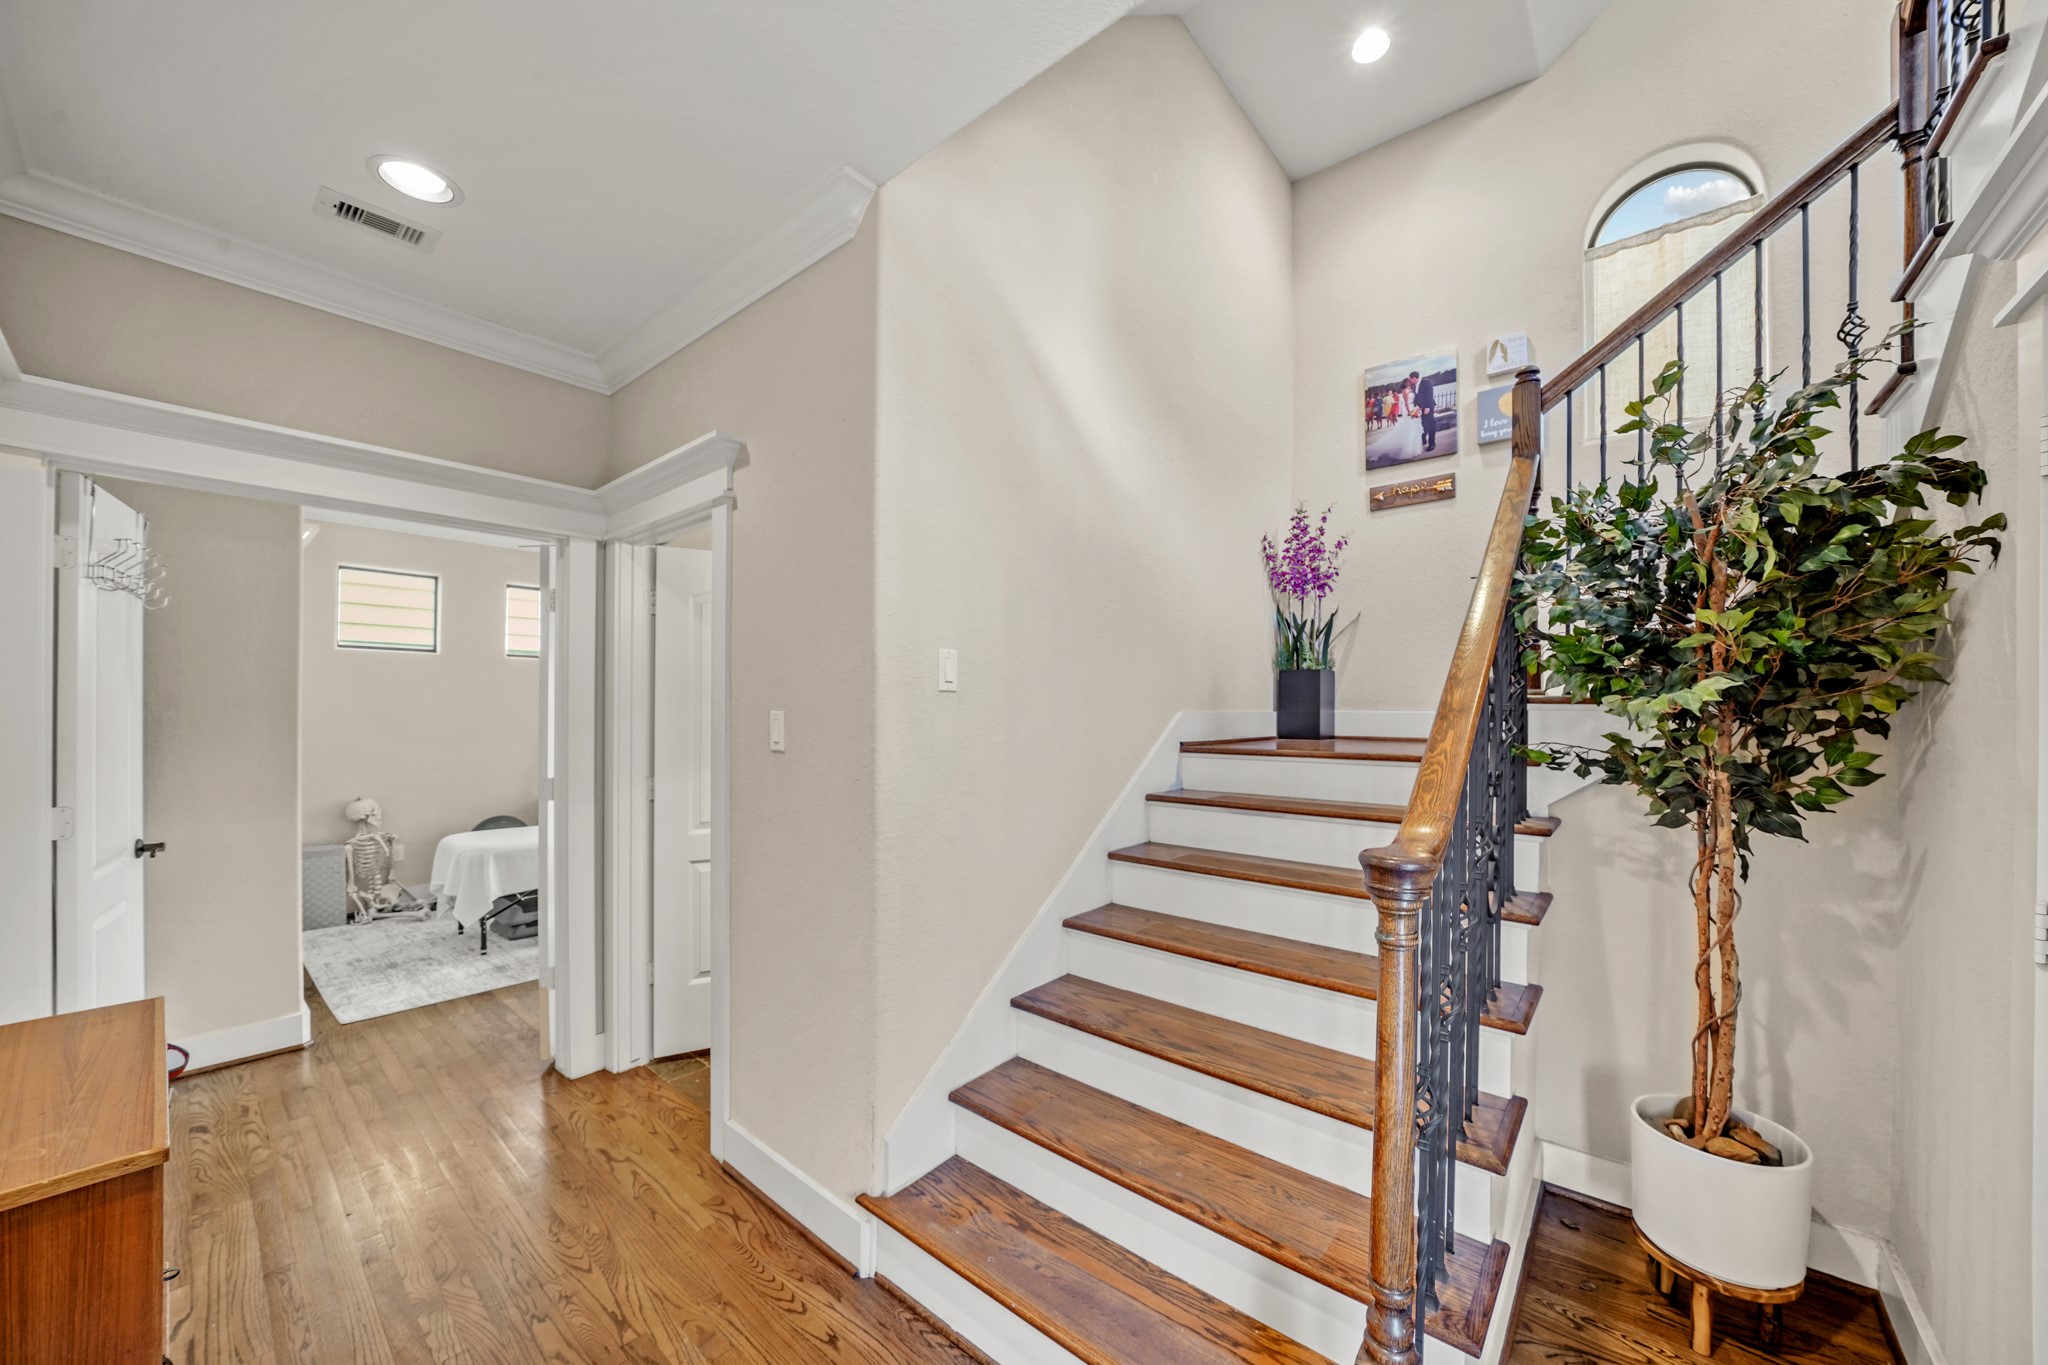 Beautiful hardwood floors and two-tone
staircase greet you as you enter the front door.